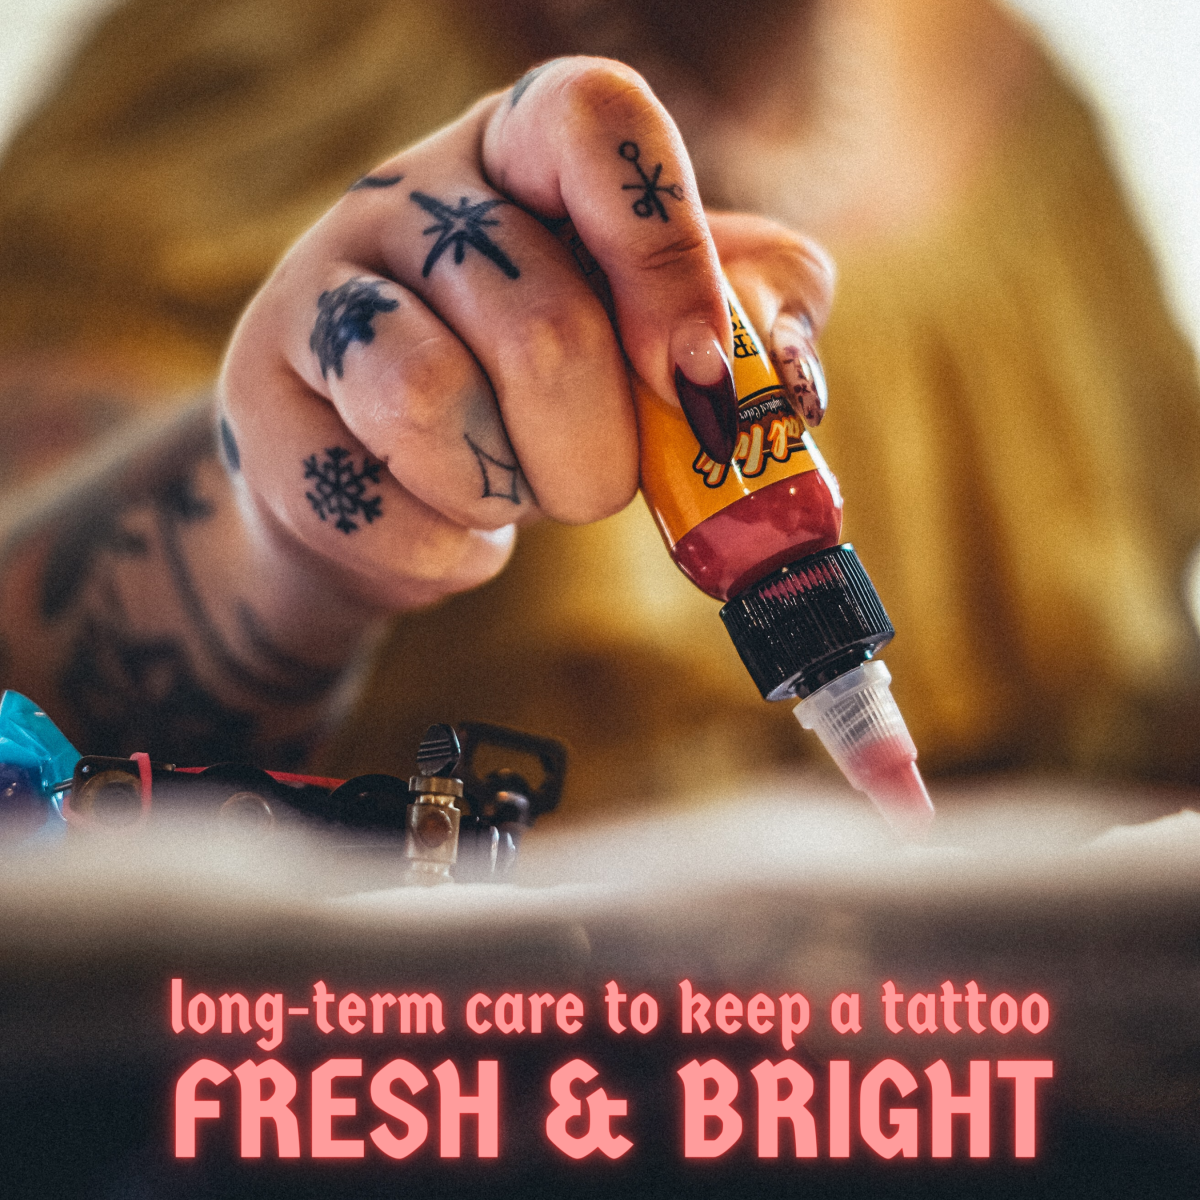 How to Take Care of an Old Tattoo to Keep It Fresh and Bright